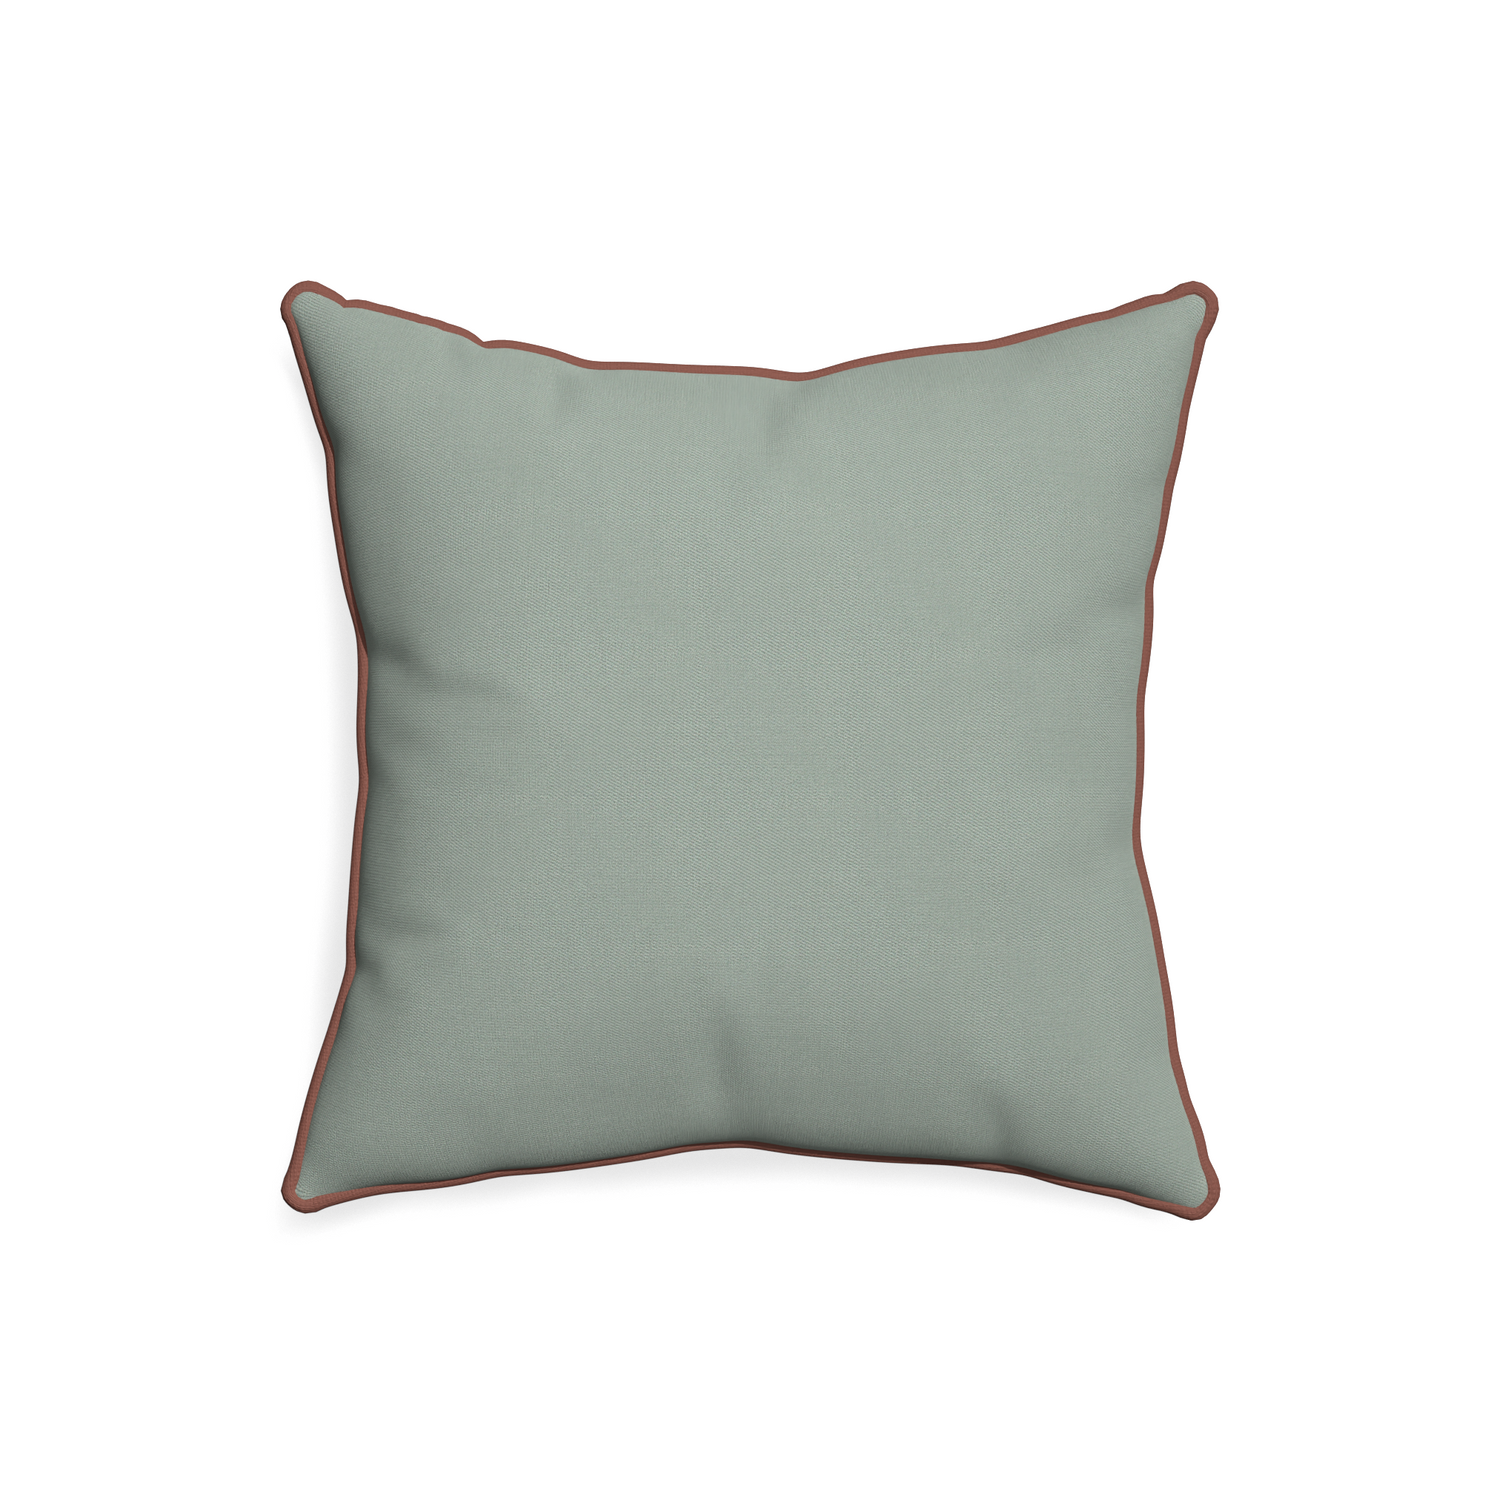 20-square sage custom sage green cottonpillow with w piping on white background